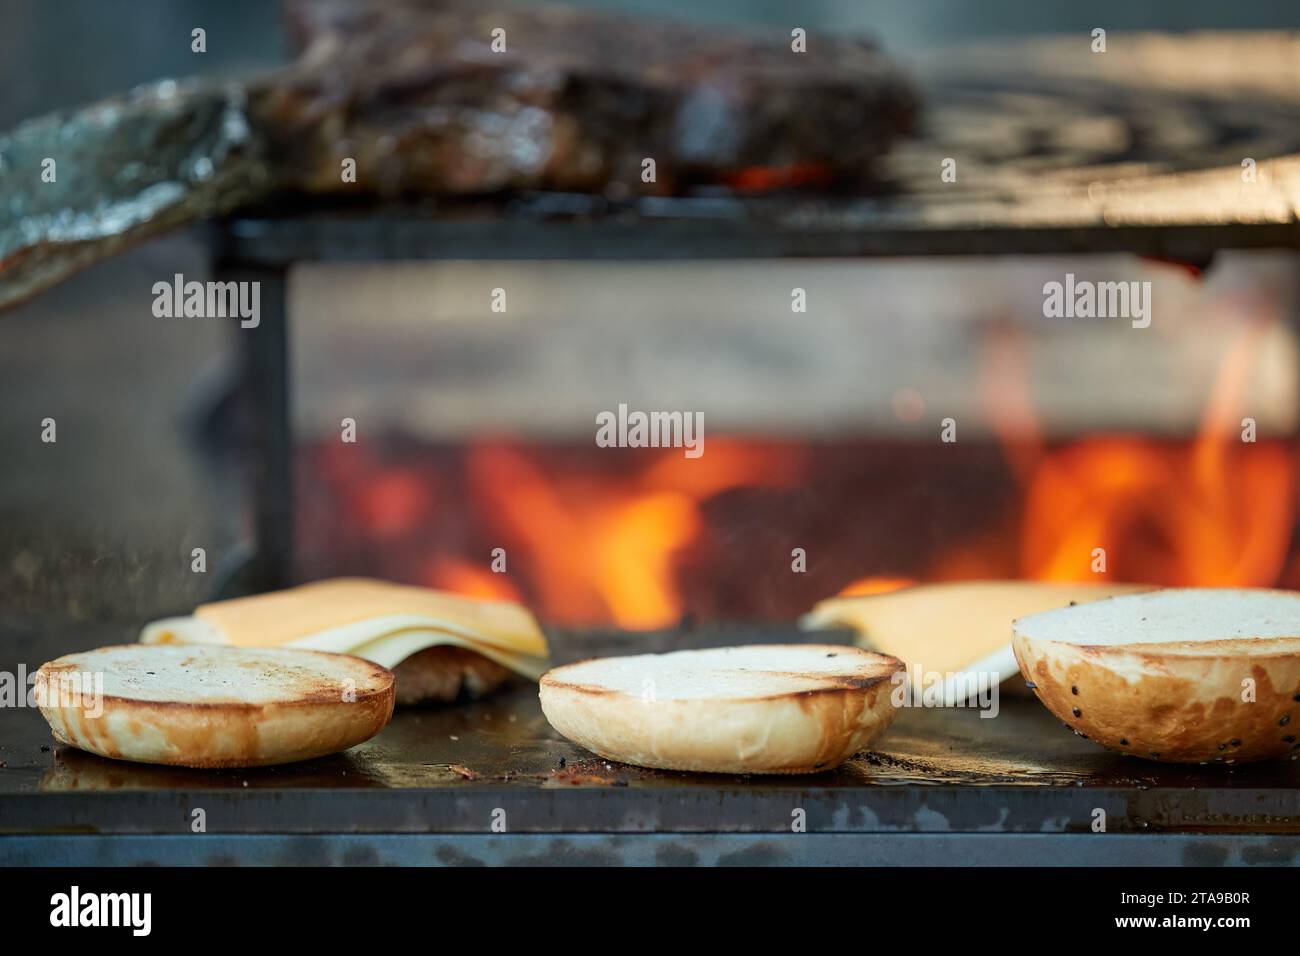 A chef prepares burgers on an outdoor grill. Close up of cooking at garden festival, flames, shallow depth of field, very colorful blurred background, Stock Photo